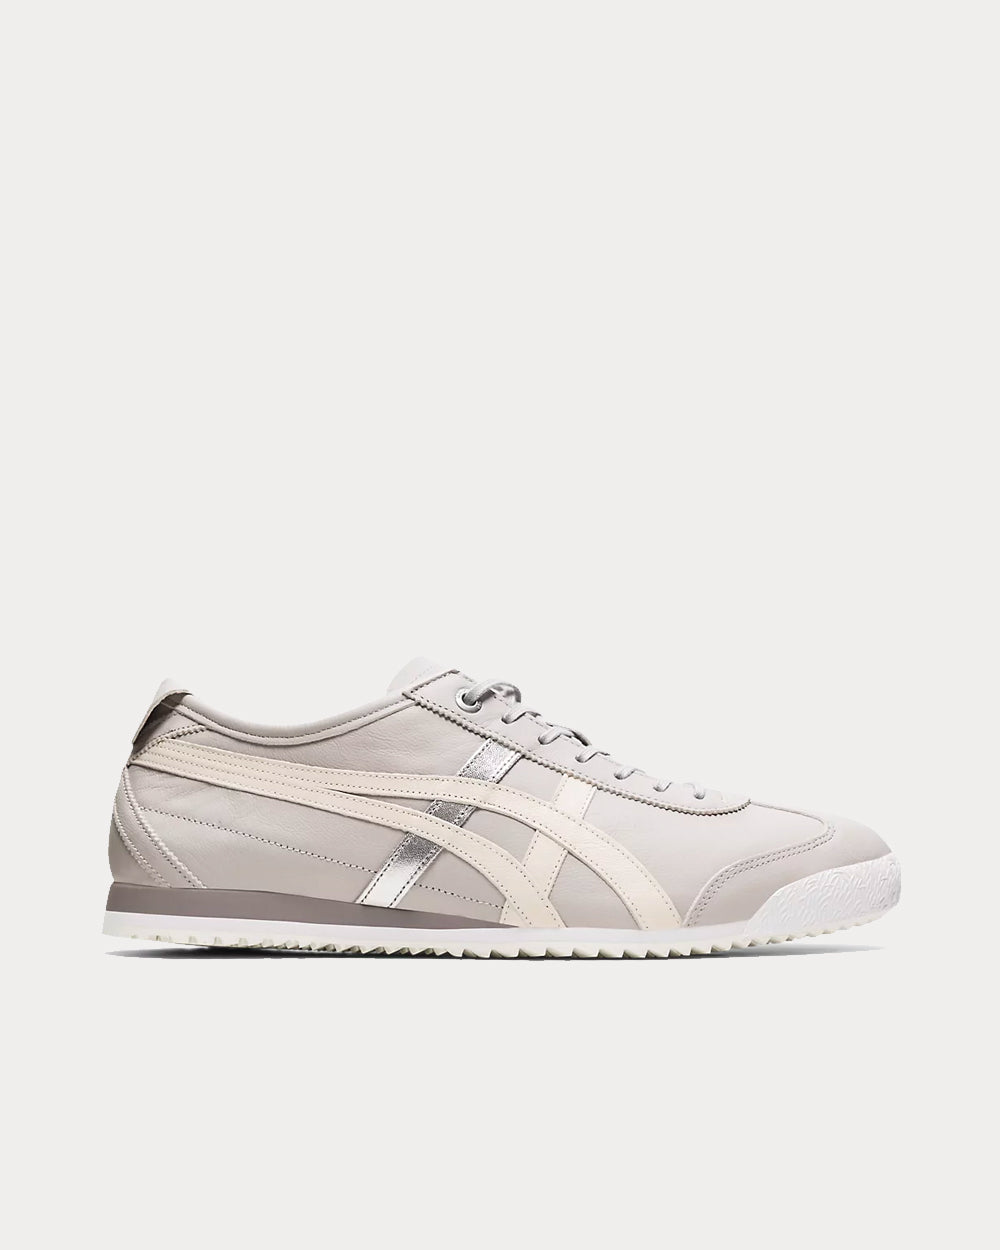 Onitsuka Tiger Mexico 66 SD Oyster Grey / Cream Low Top Sneakers ...